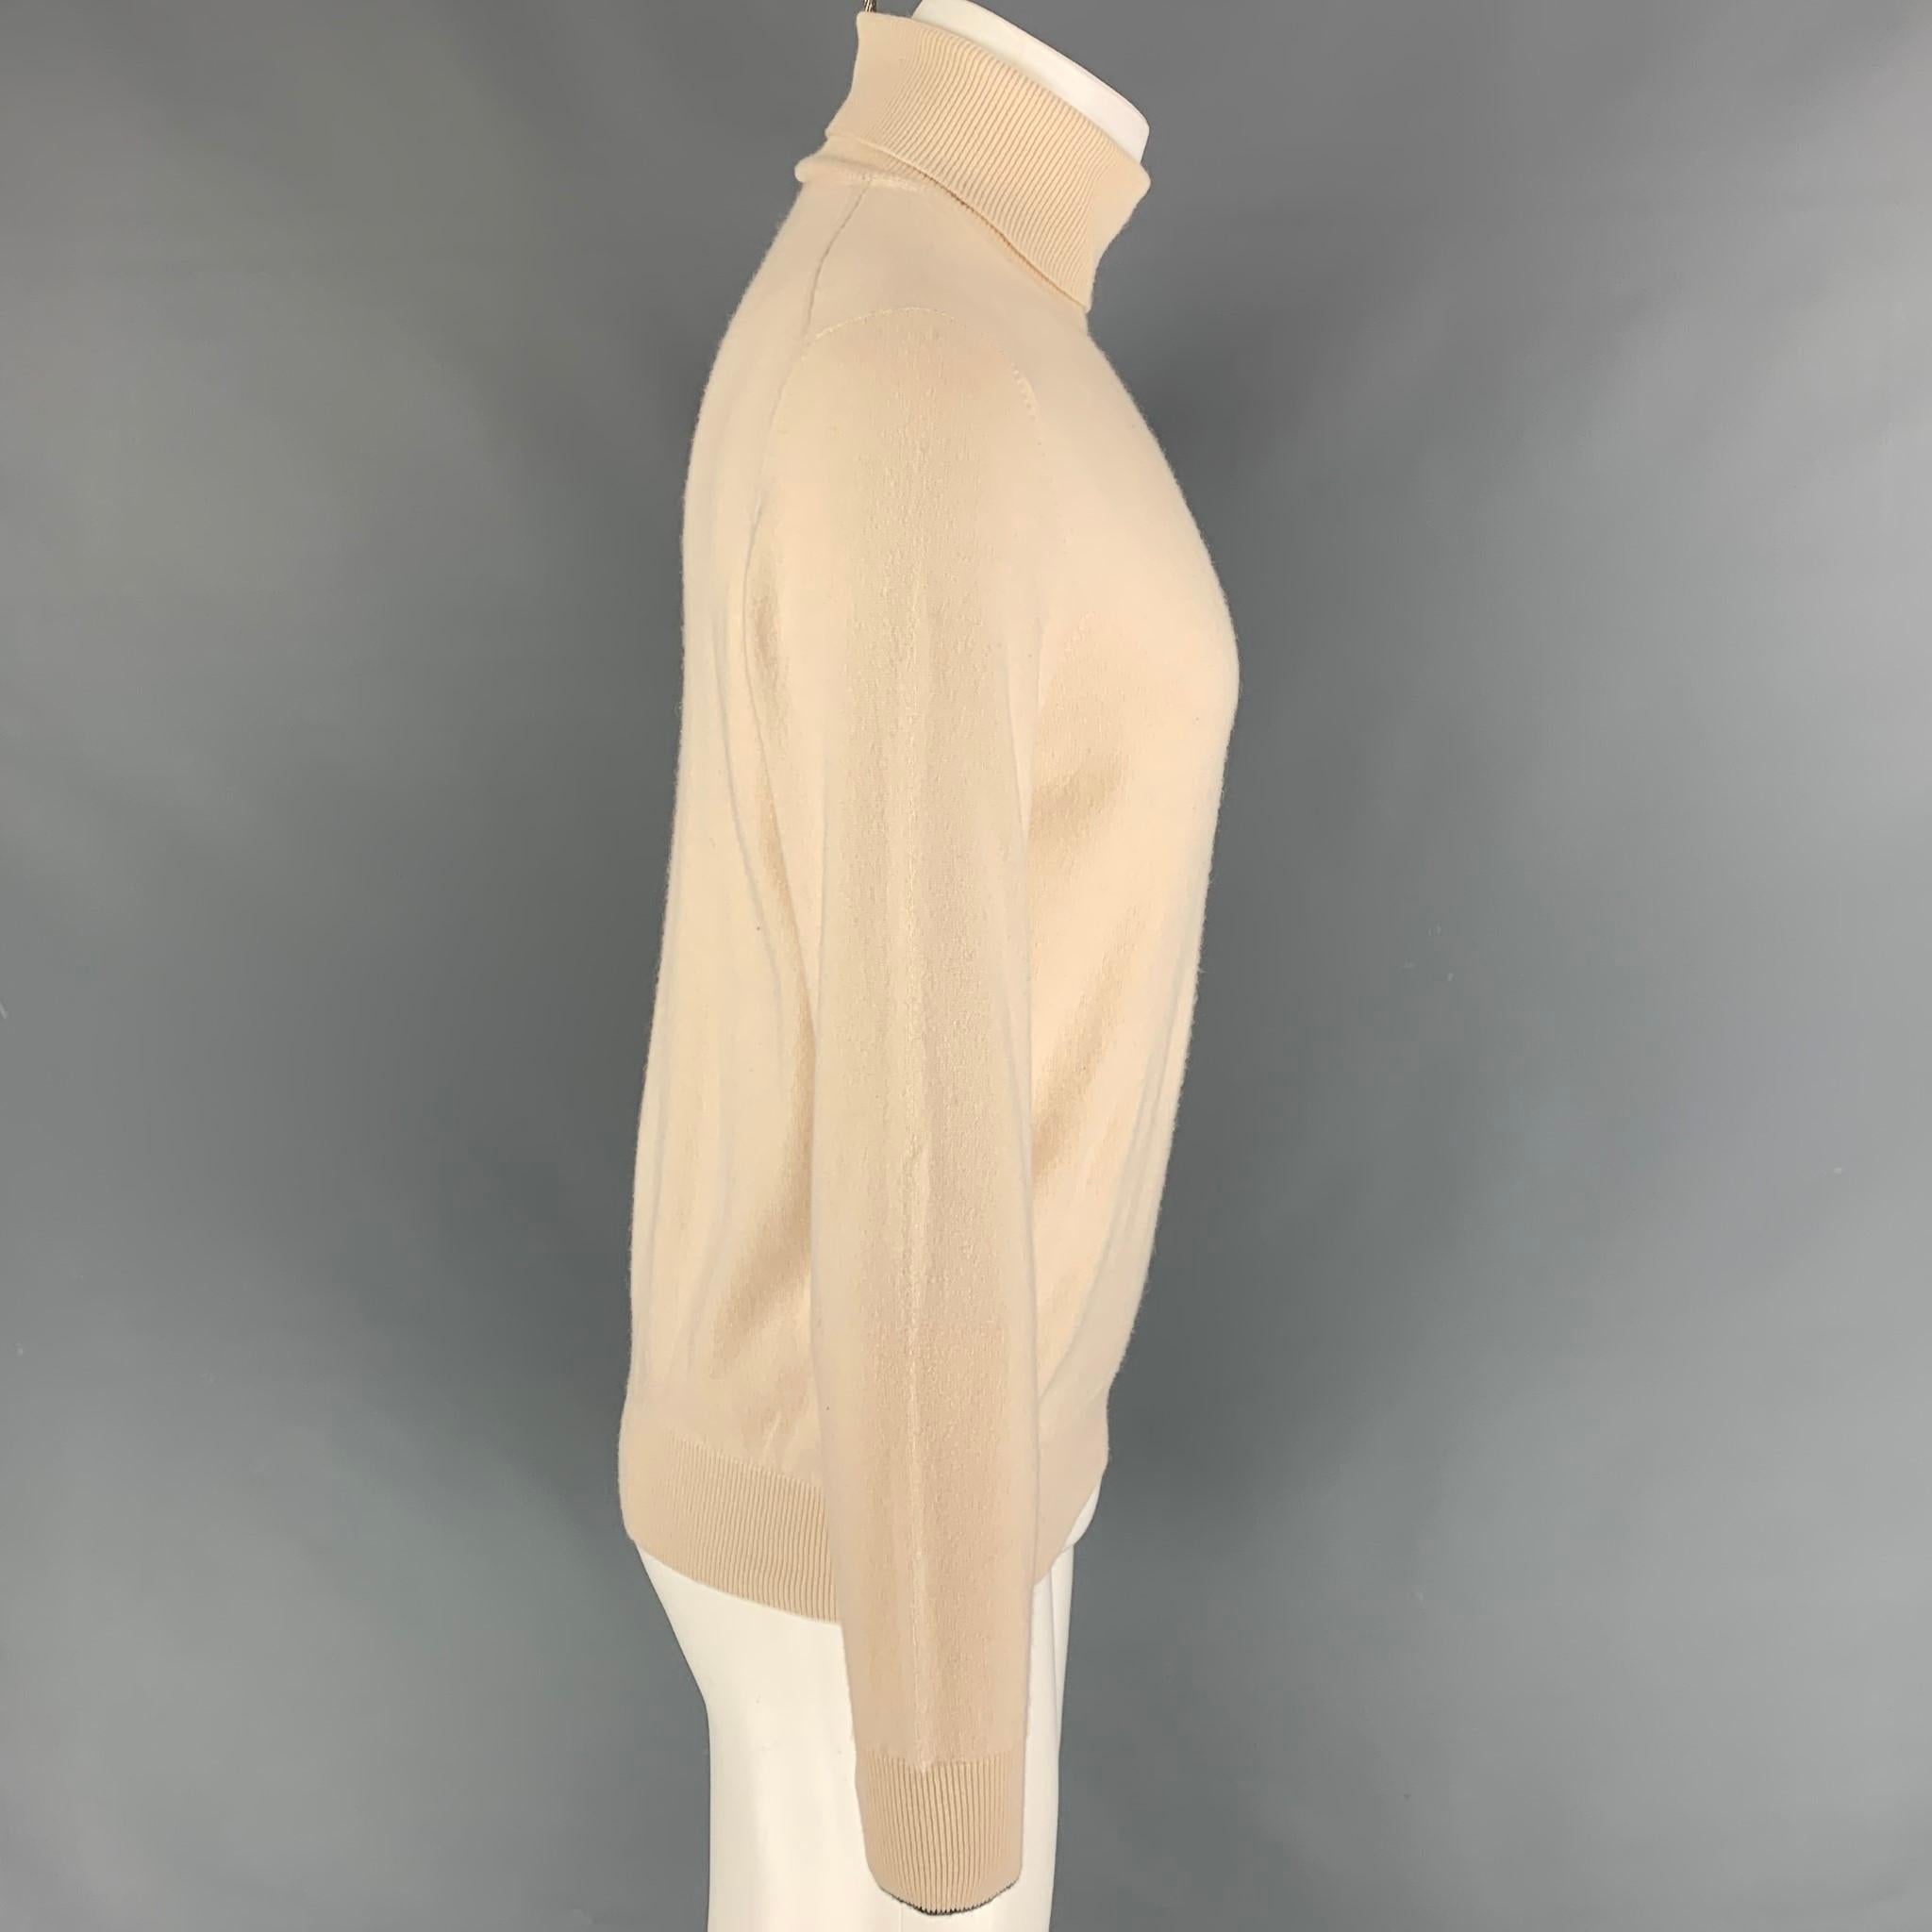 BRUNELLO CUCINELLI pullover comes in a cream knitted cashmere featuring a turtleneck. Made in Italy. 

Very Good Pre-Owned Condition.
Marked: 48

Measurements:

Shoulder: 18 in.
Chest: 38 in.
Sleeve: 25.5 in.
Length: 25.5 in. 